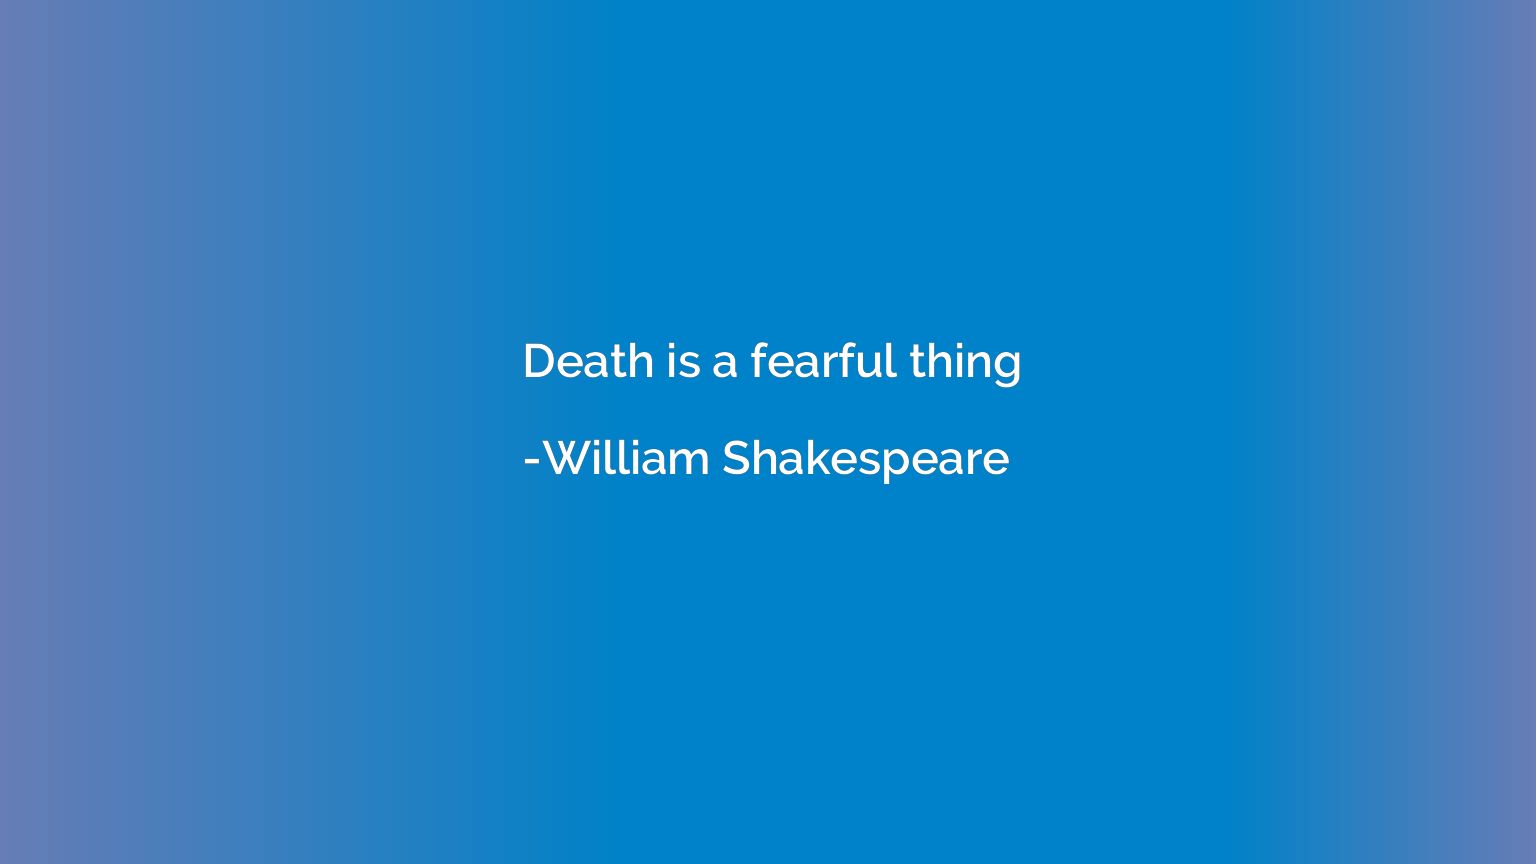 Death is a fearful thing